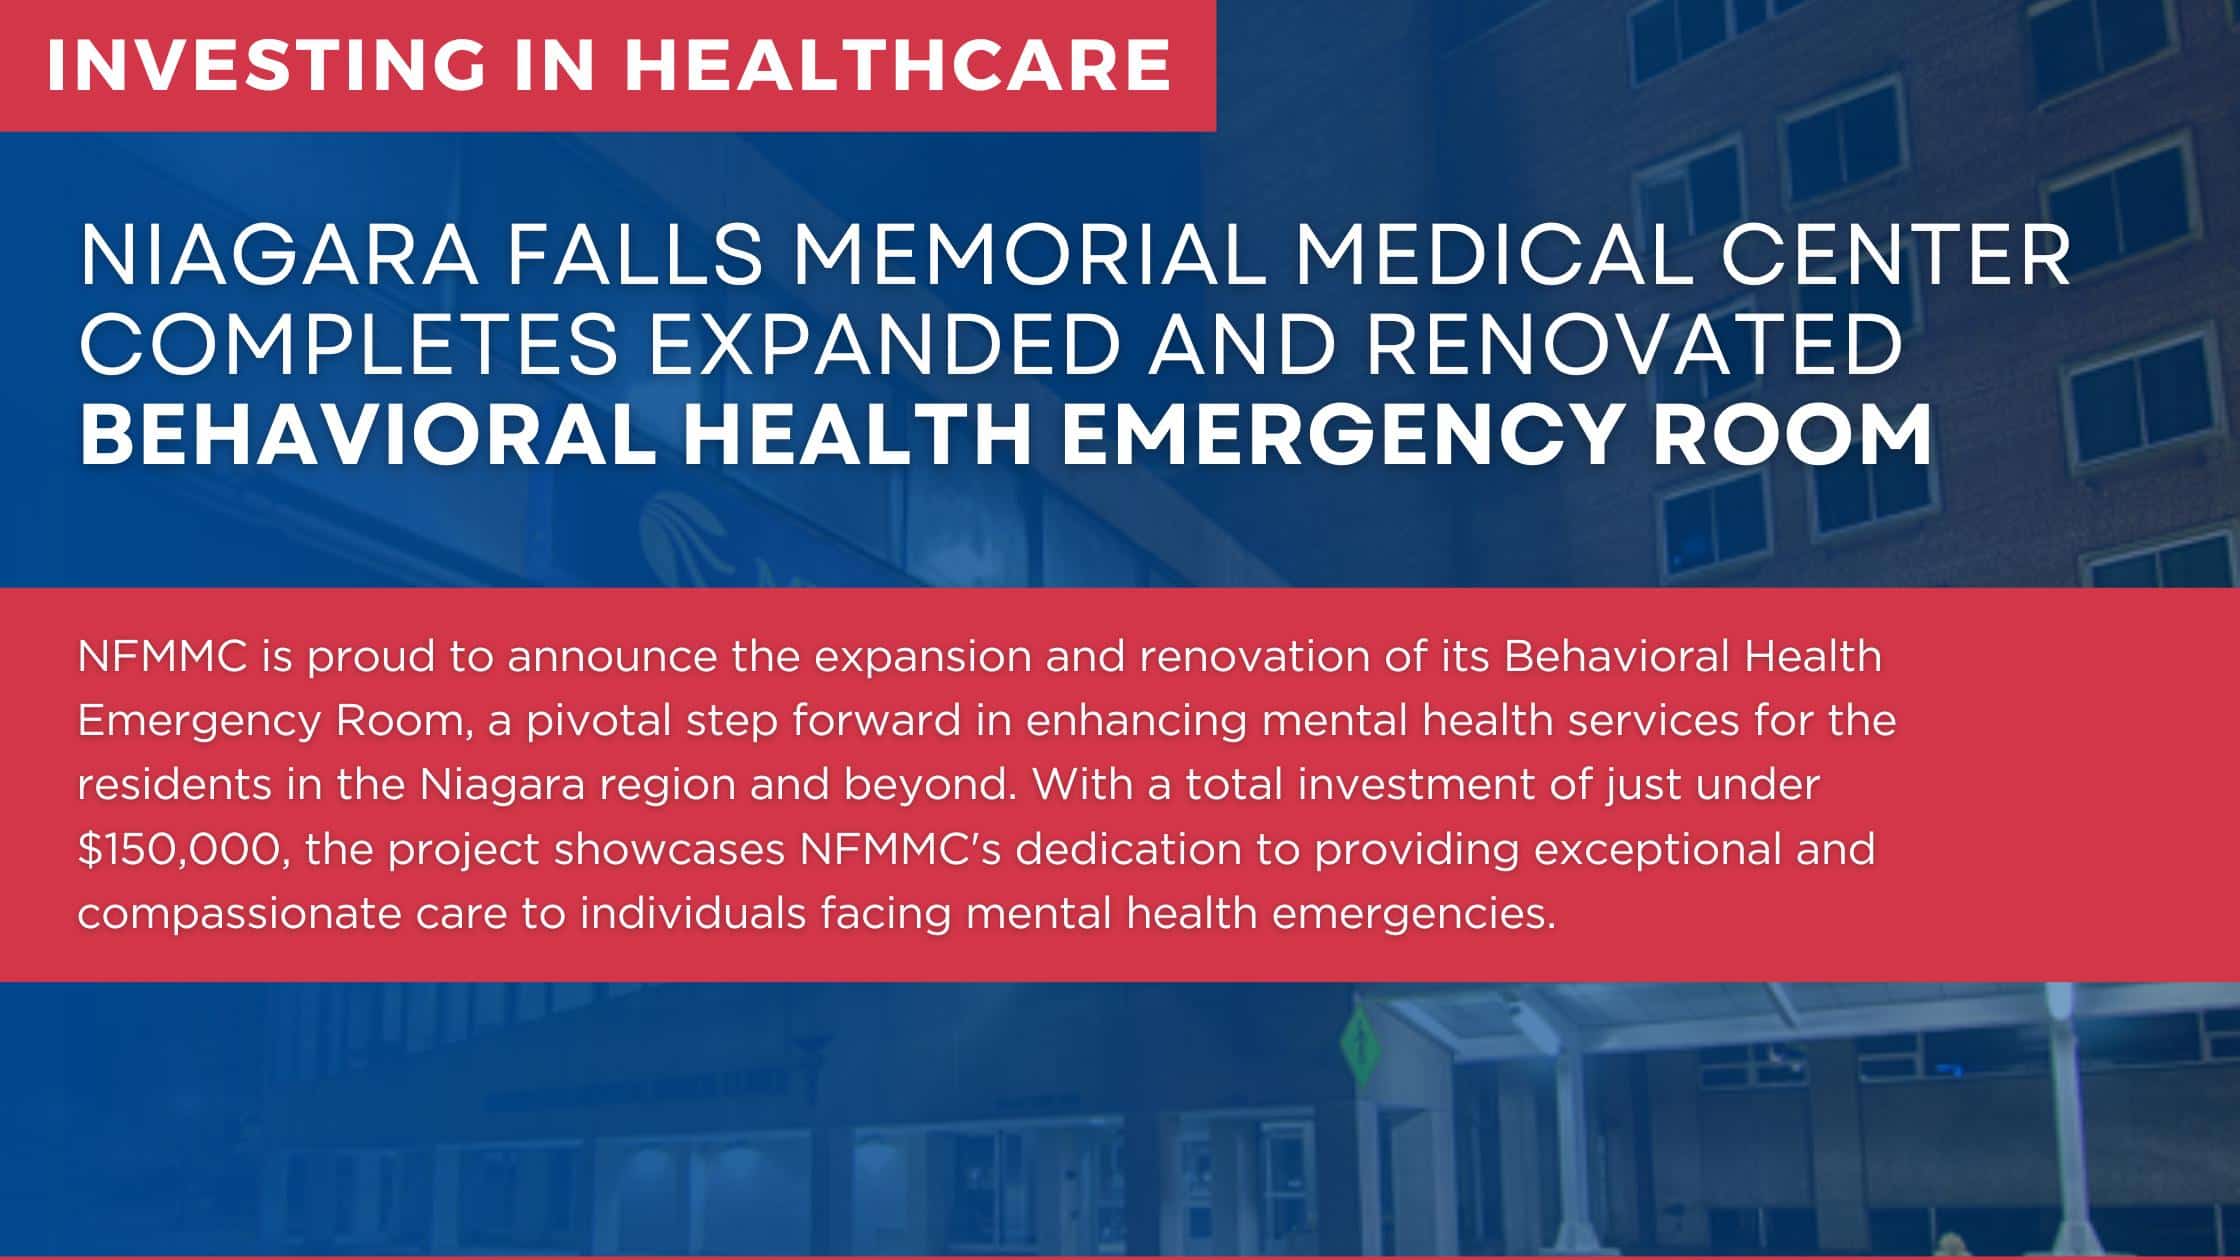 Niagara Falls Memorial Medical Center Completes Expanded and Renovated Behavioral Health Emergency Room